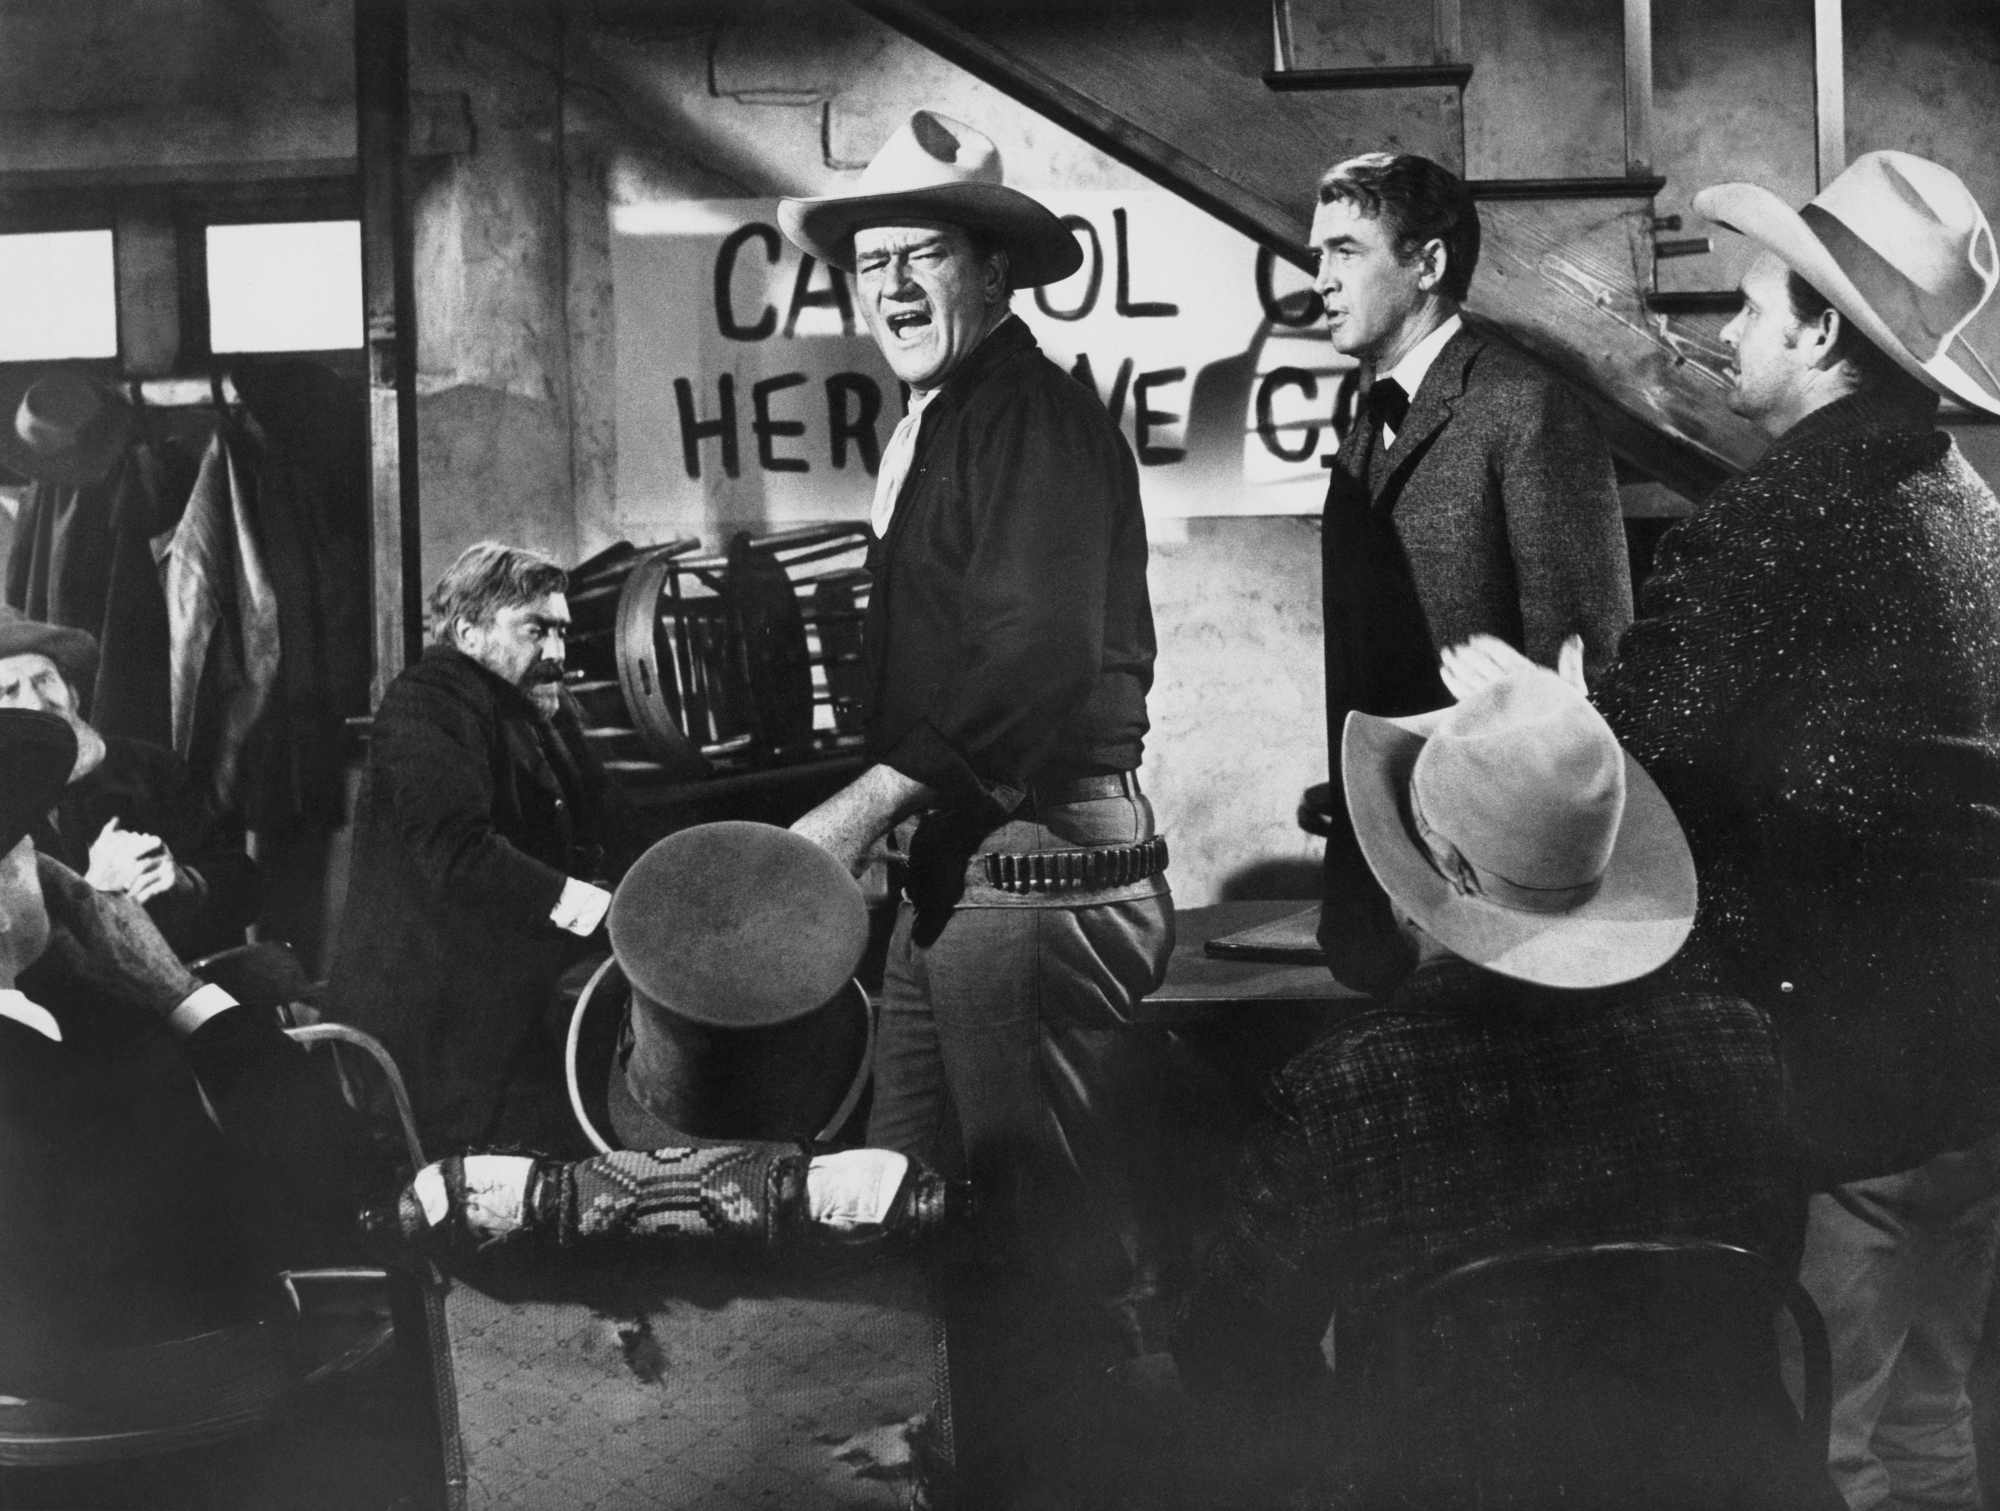 'The Man Who Shot Liberty Valance' John Wayne as Tom Doniphon and James Stewart as Ransom Stoddard in a black-and-white picture in the pub.